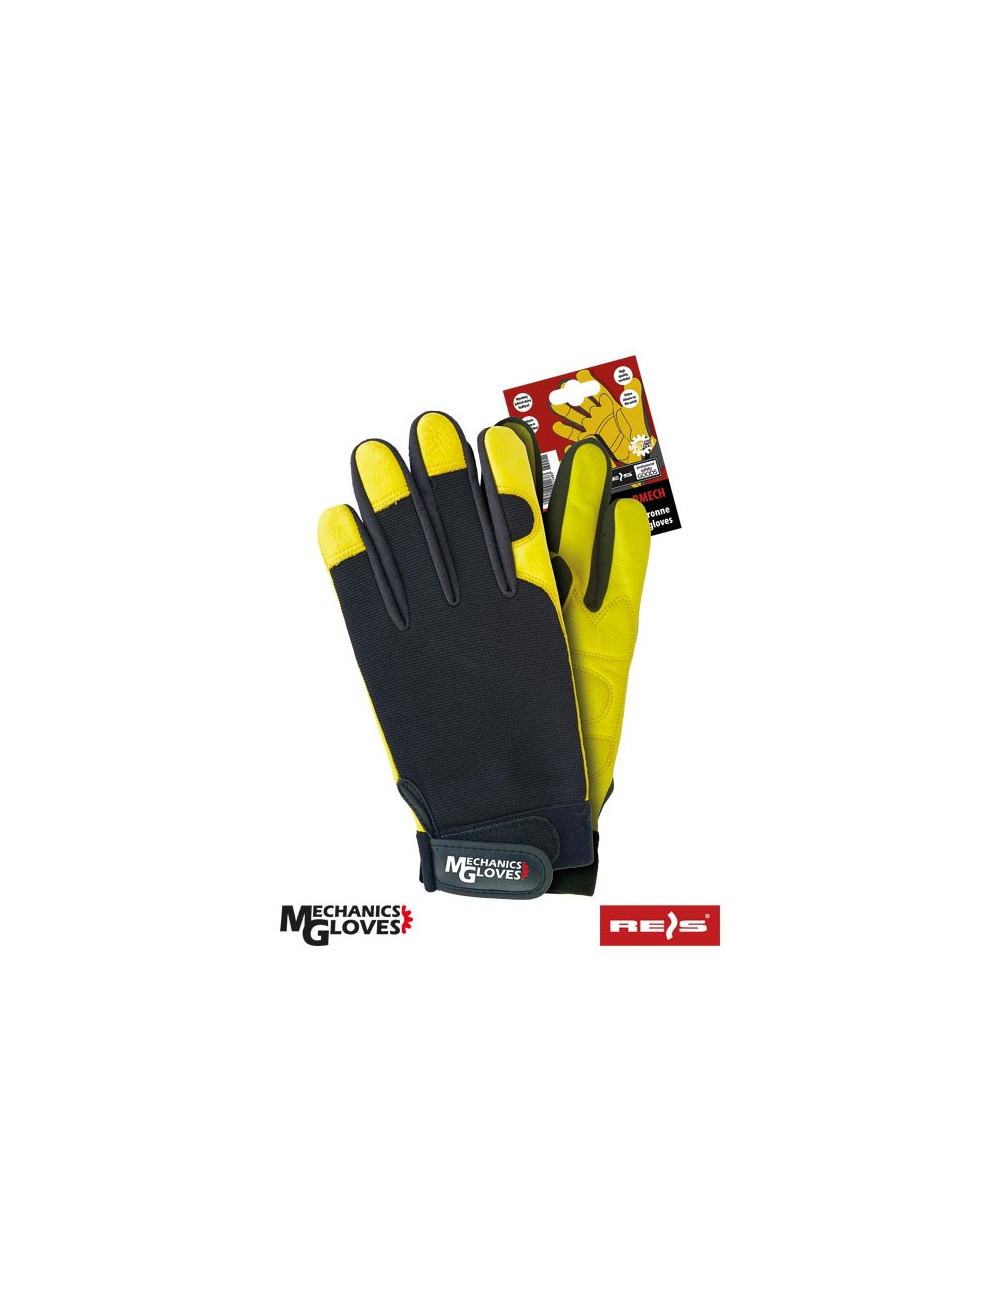 Protective gloves rmech by black-yellow Reis